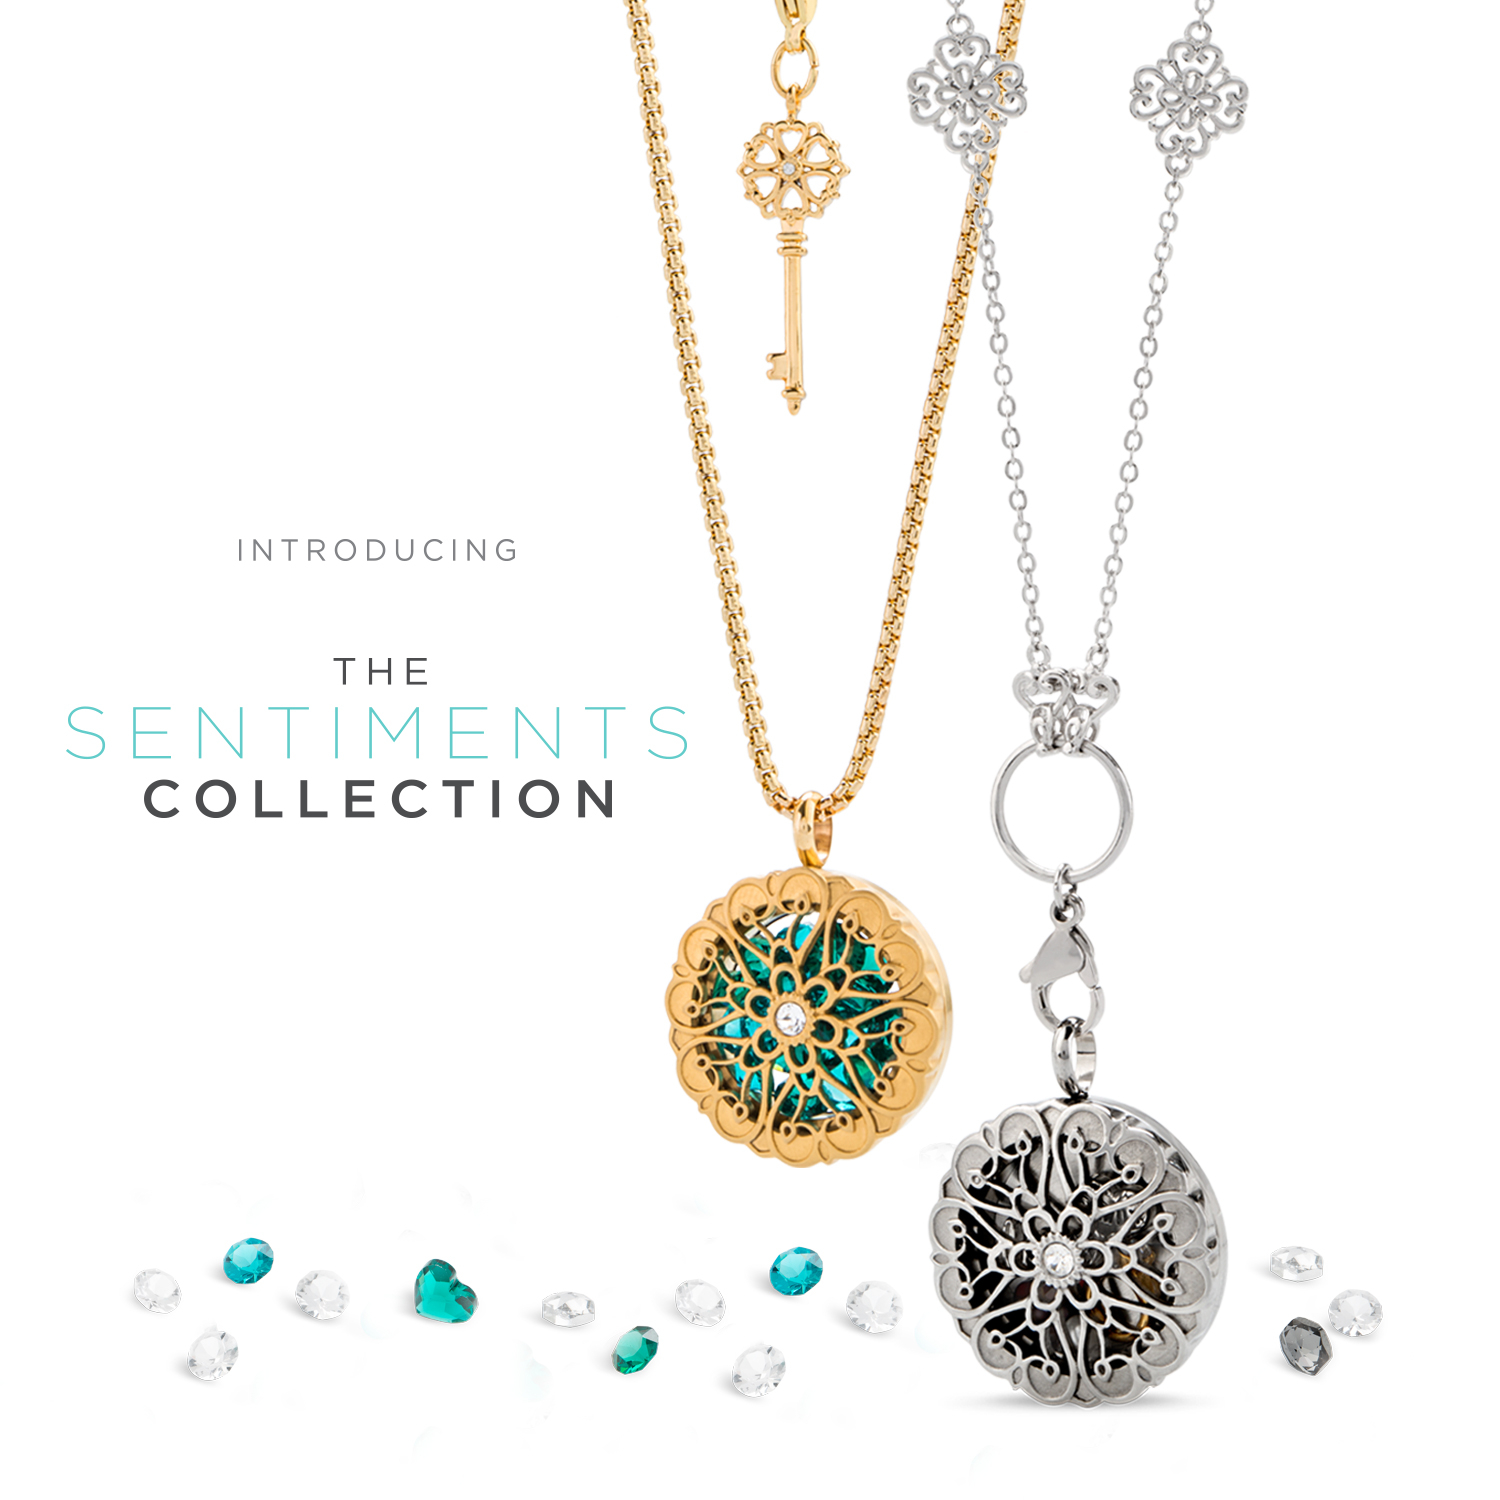 Origami Owl Over The Heart Chain Introducing The Sentiments Moodology Collections Origamiowlnews